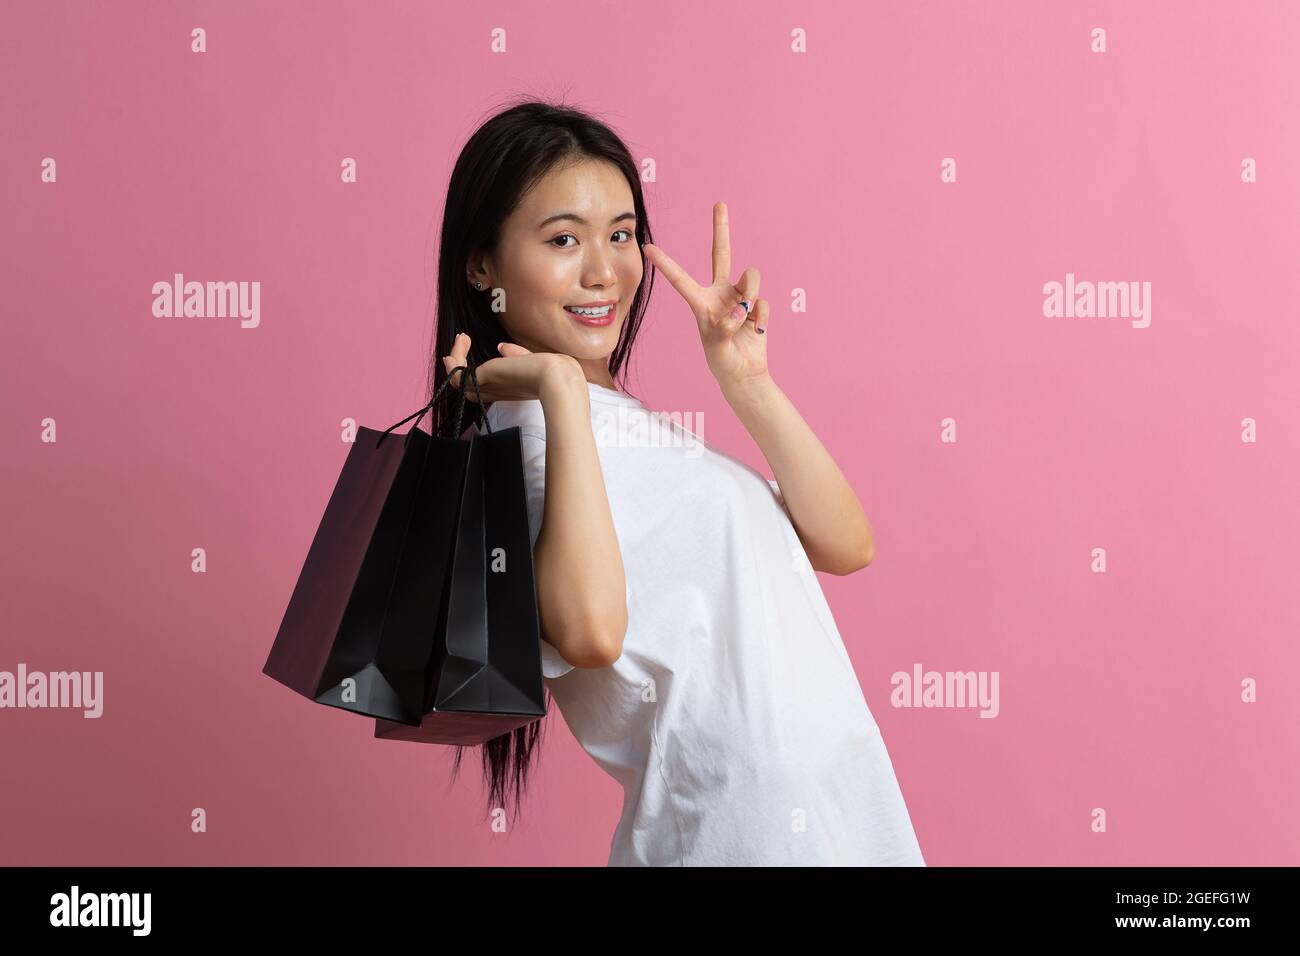 Shopping asian happy woman holding shopping bags v gesture on pink background. Stock Photo